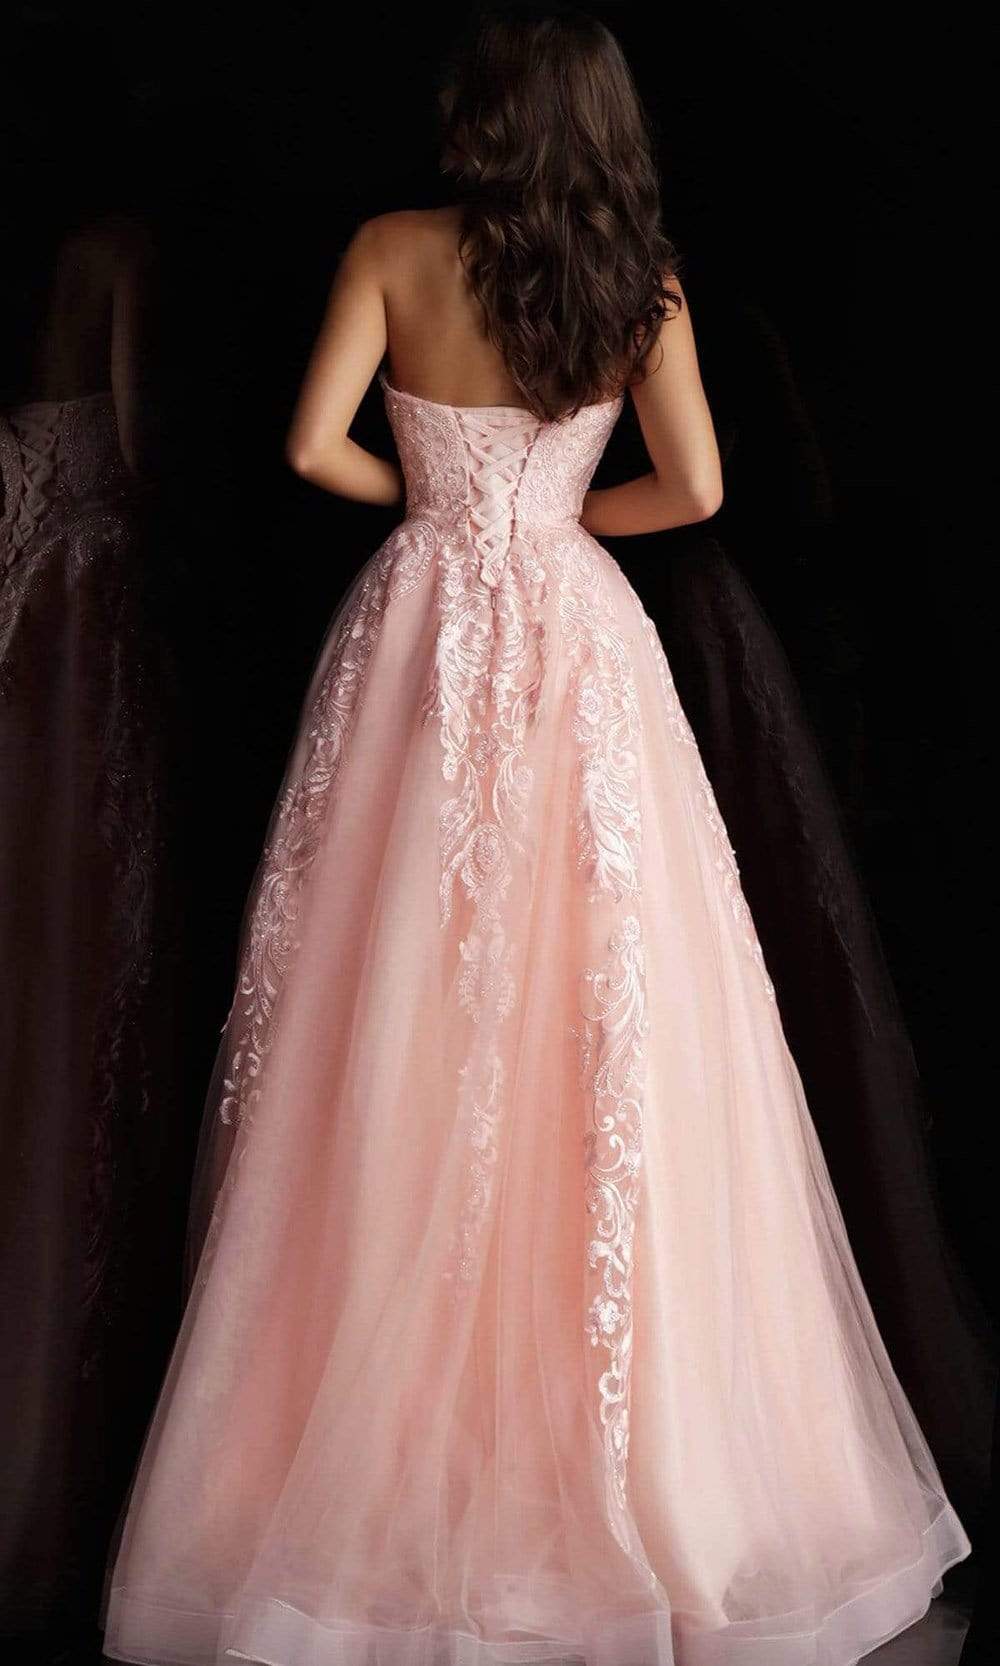 Jovani - Strapless Sweetheart Lace Ballgown JVN66970 - 1 pc Blush In Size 2 Available CCSALE